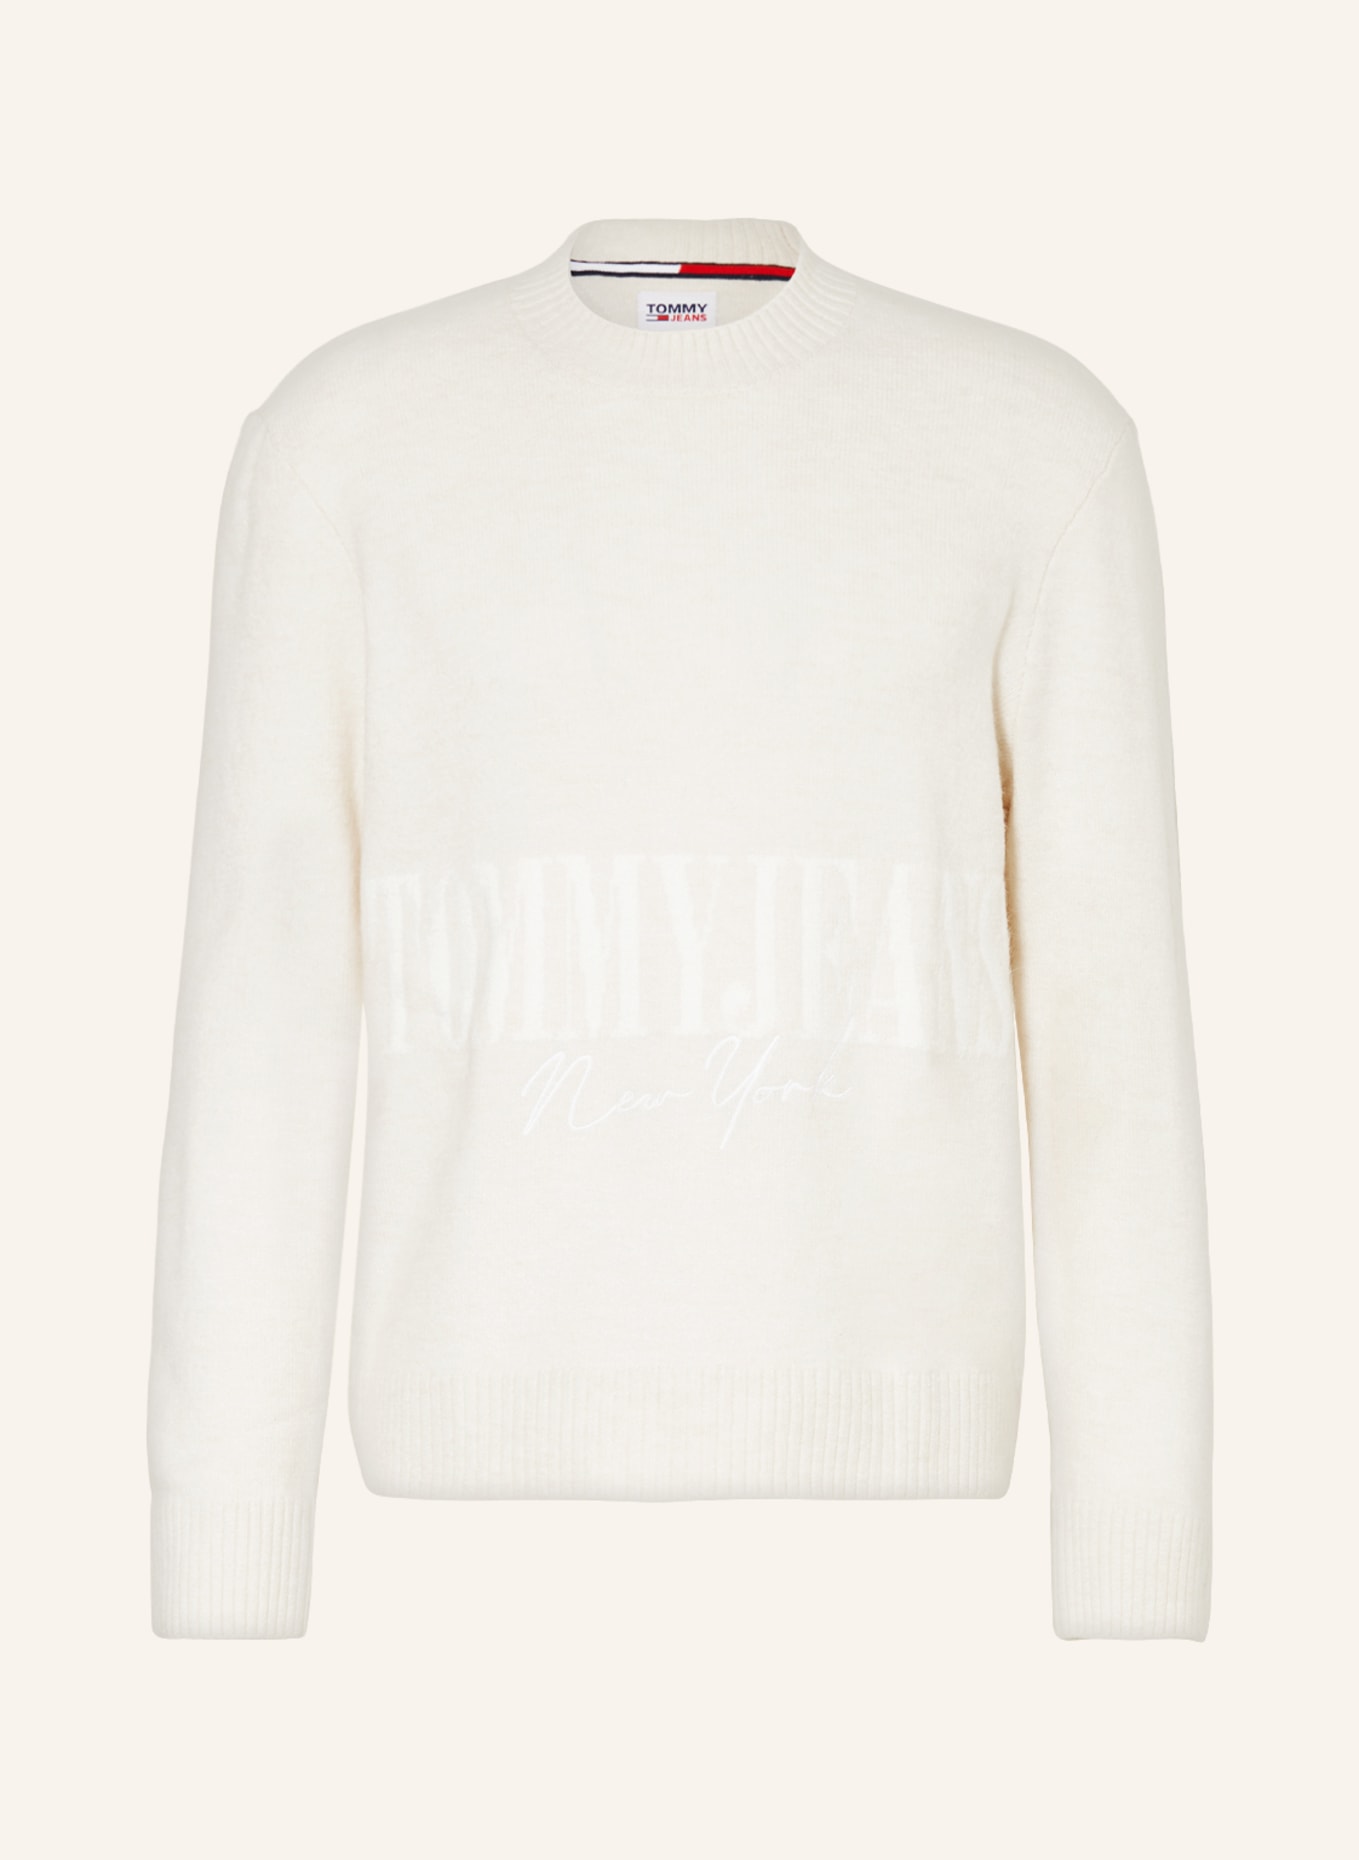 TOMMY JEANS Pullover, Farbe: WEISS (Bild 1)